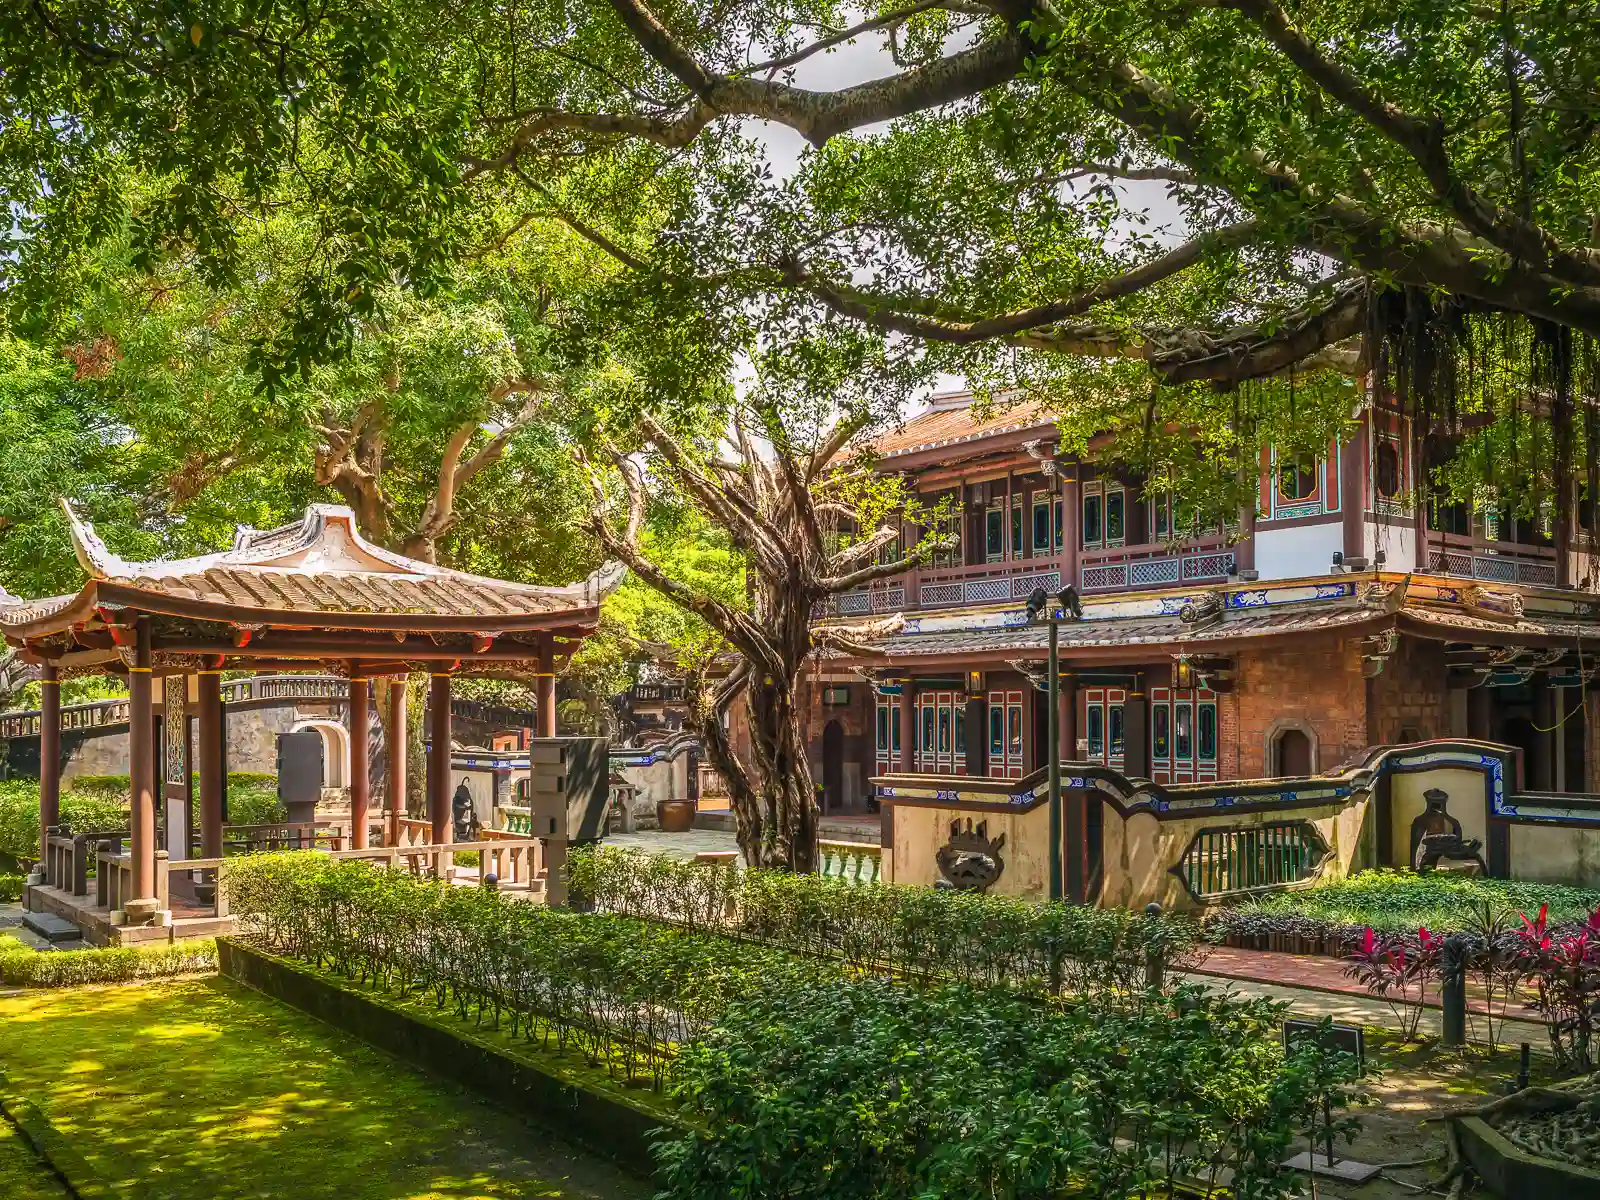 A beautiful wooden pavilion and one building of the Lin Family Mansion are visible between the plants of a lush and neatly-manicured garden.